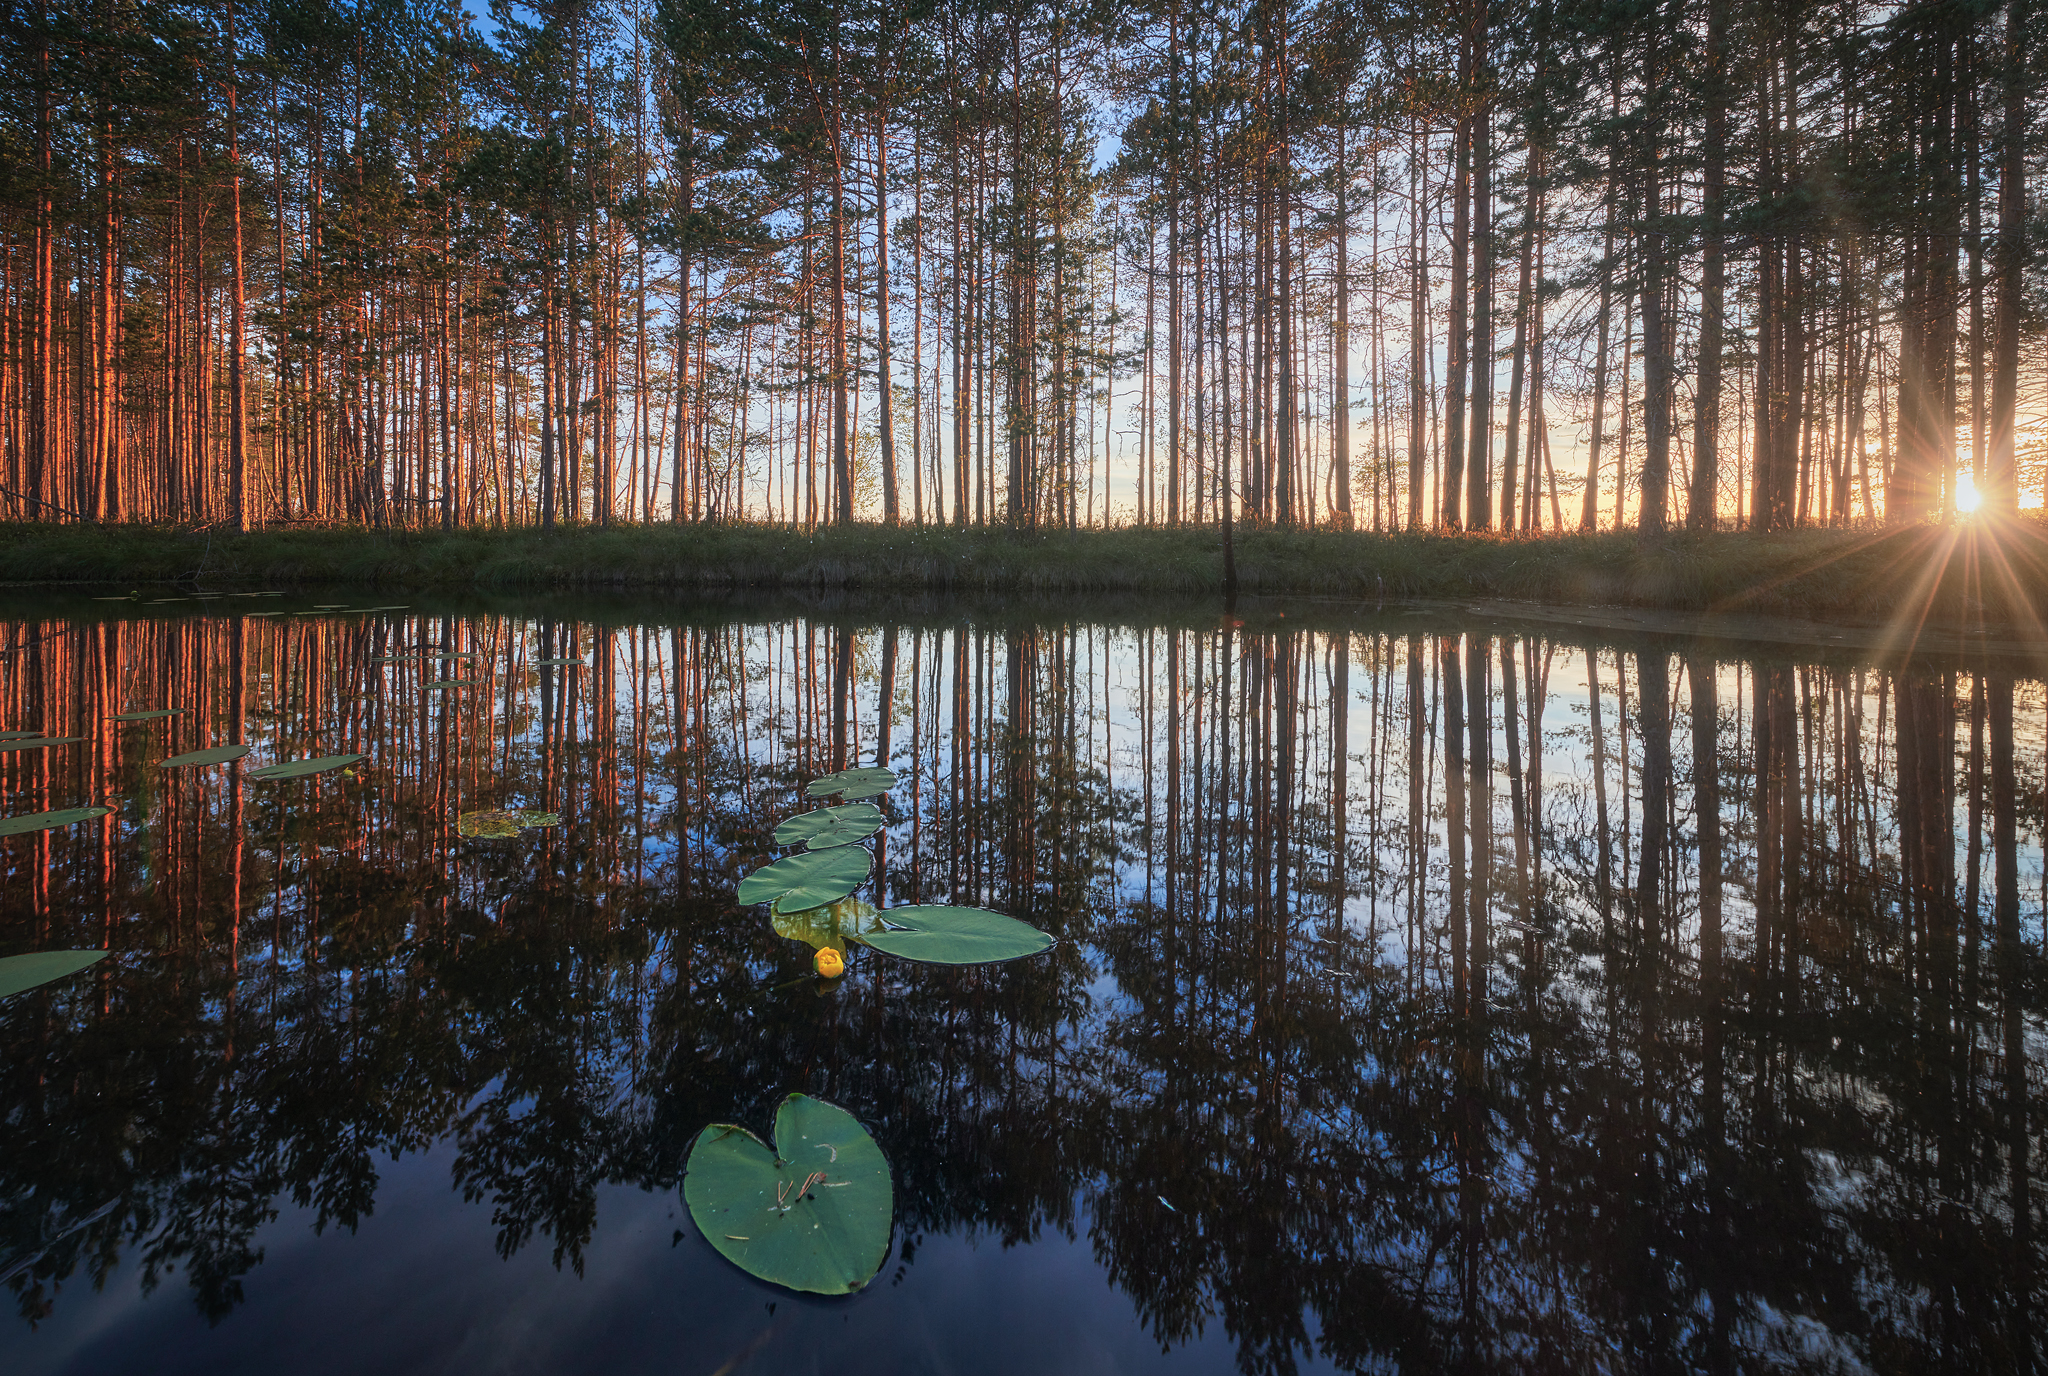 Water Lily Pads Nature Trees Sunlight Sunset Reflection Photography Outdoors Anton Kononov 2048x1376